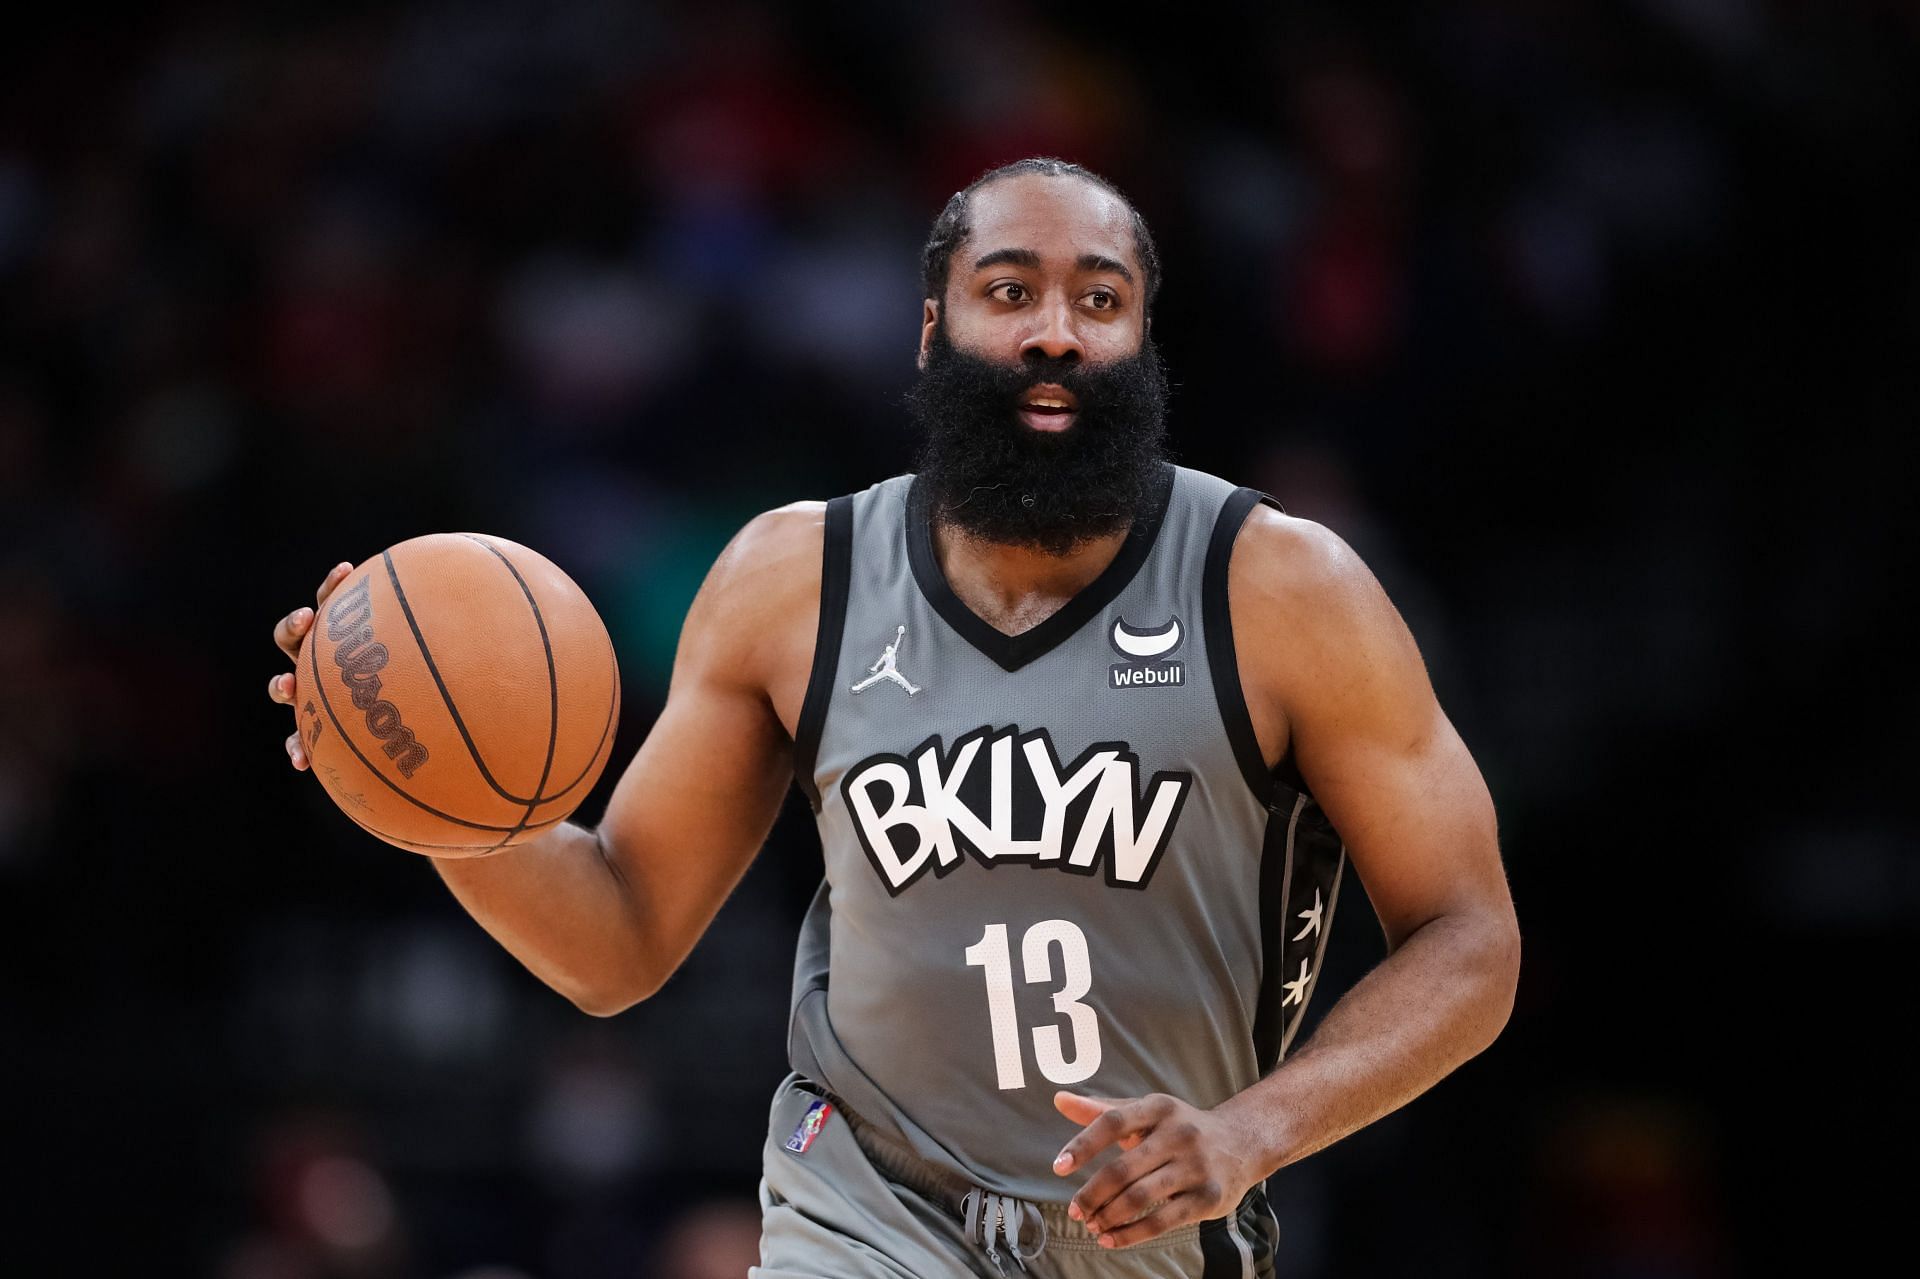 James Harden said he felt &quot;very special&quot; making his return to Houston